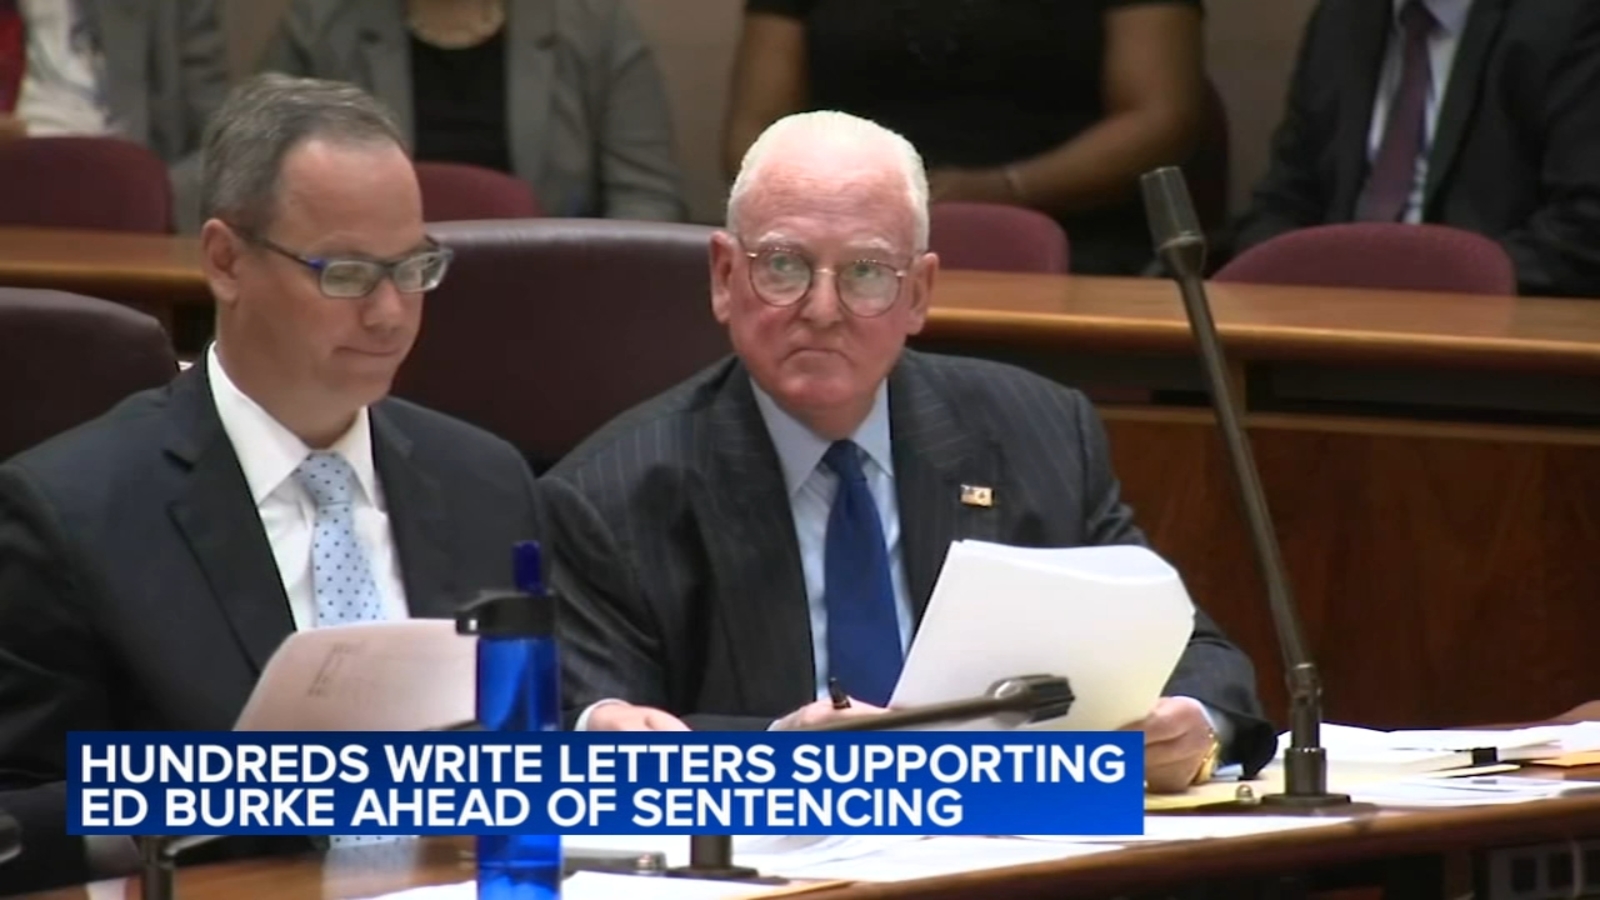 Hundreds write letters to judge in support of former Chicago Alderman Ed Burke ahead of sentencing for corruption convictions [Video]